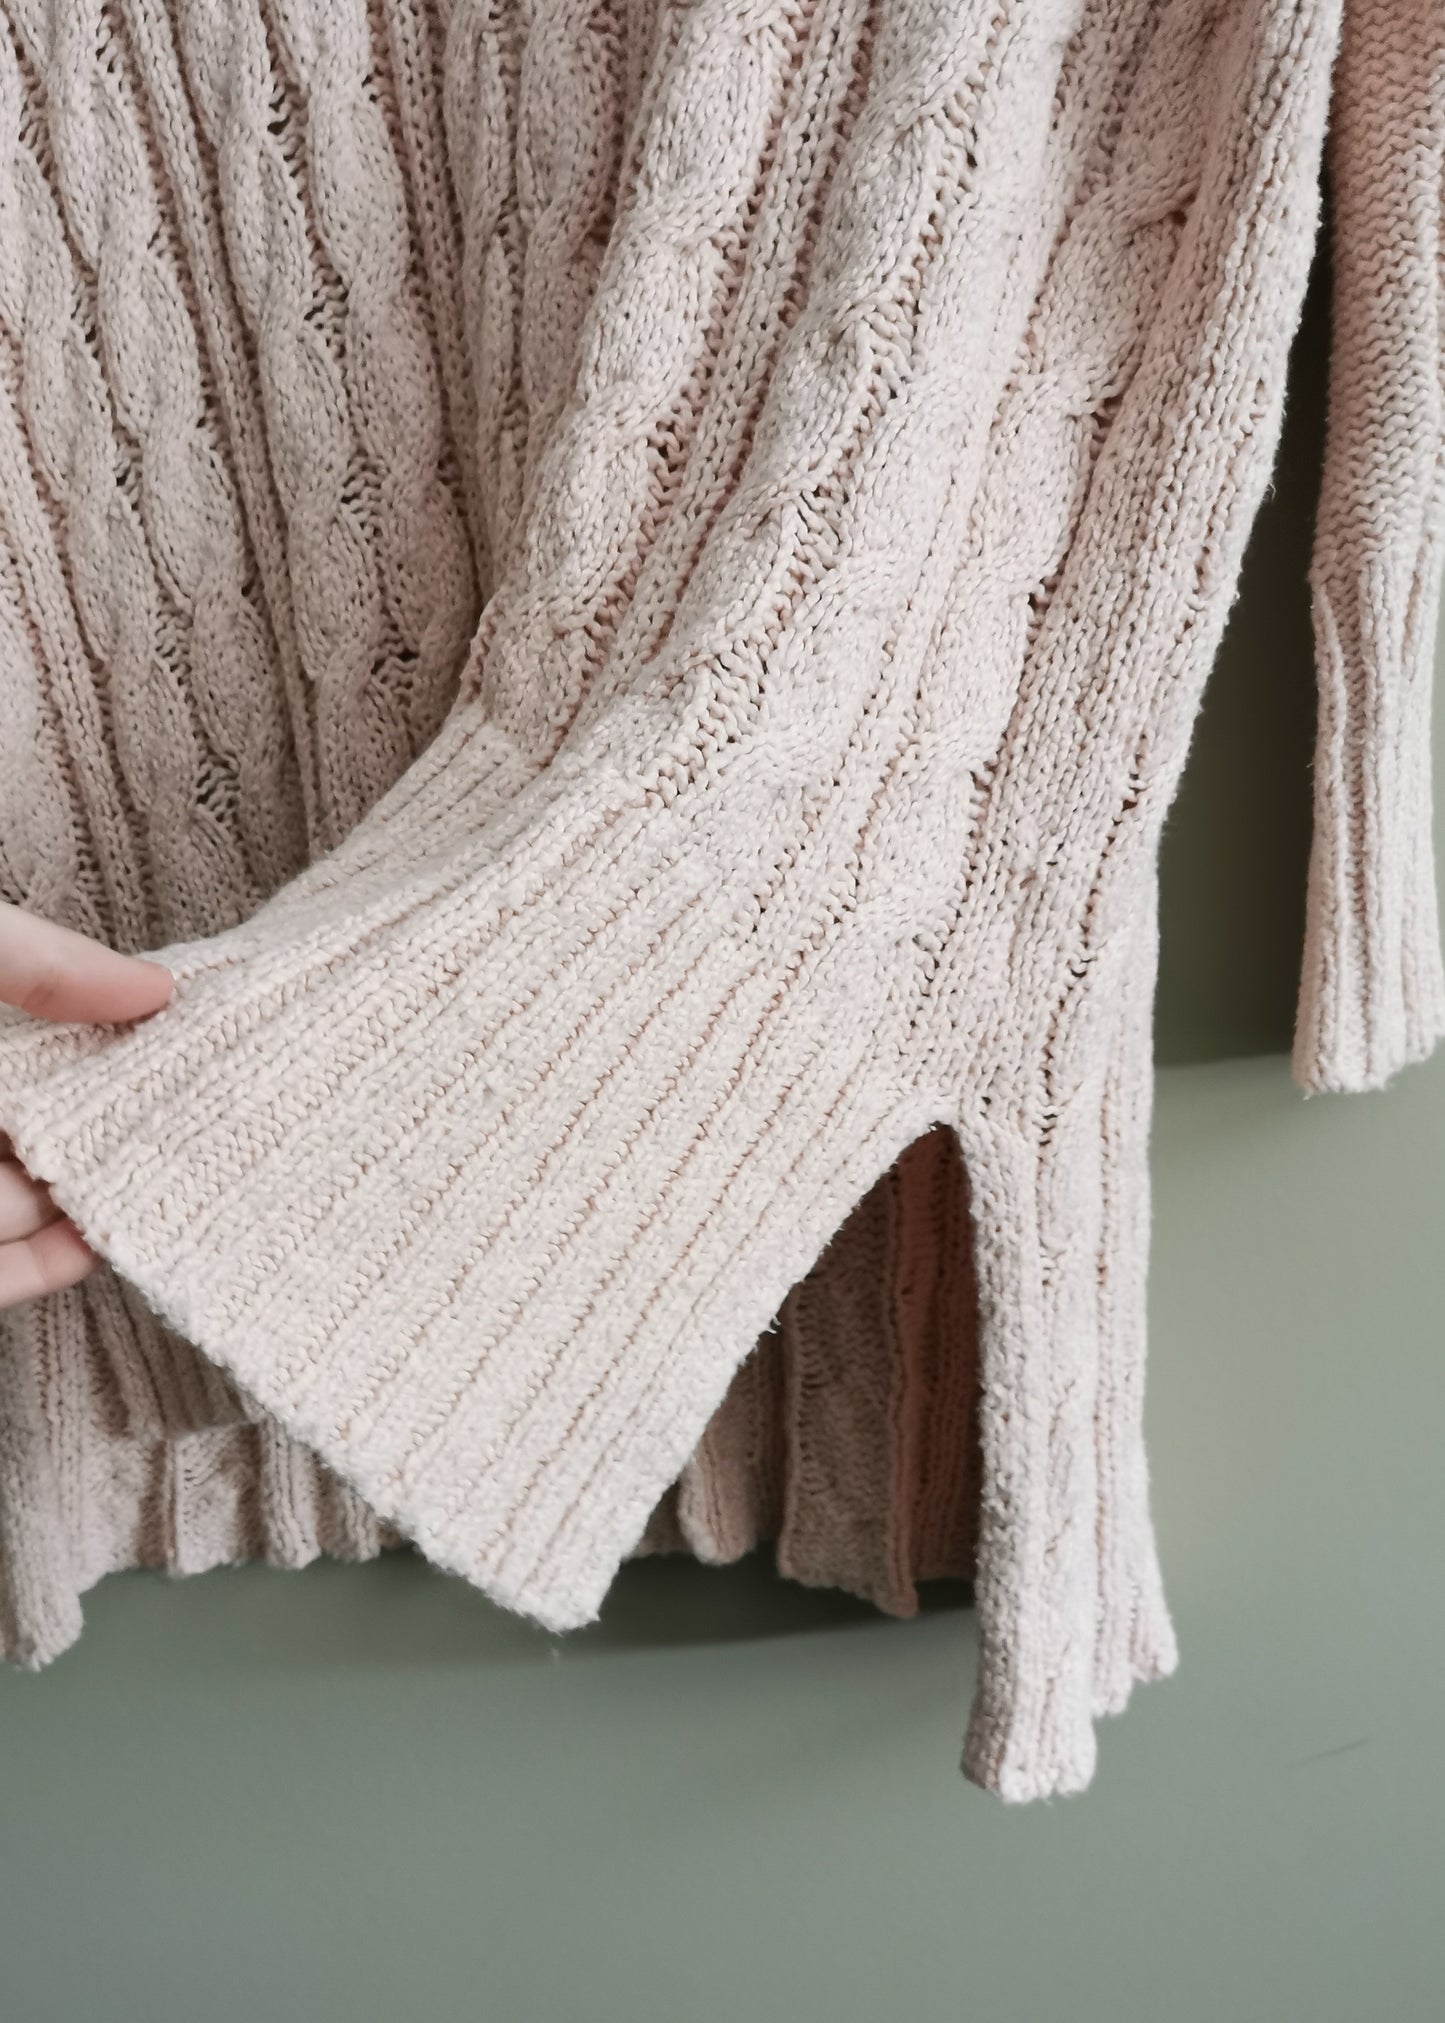 Free People Cotton Cable Knit Sweater (S)